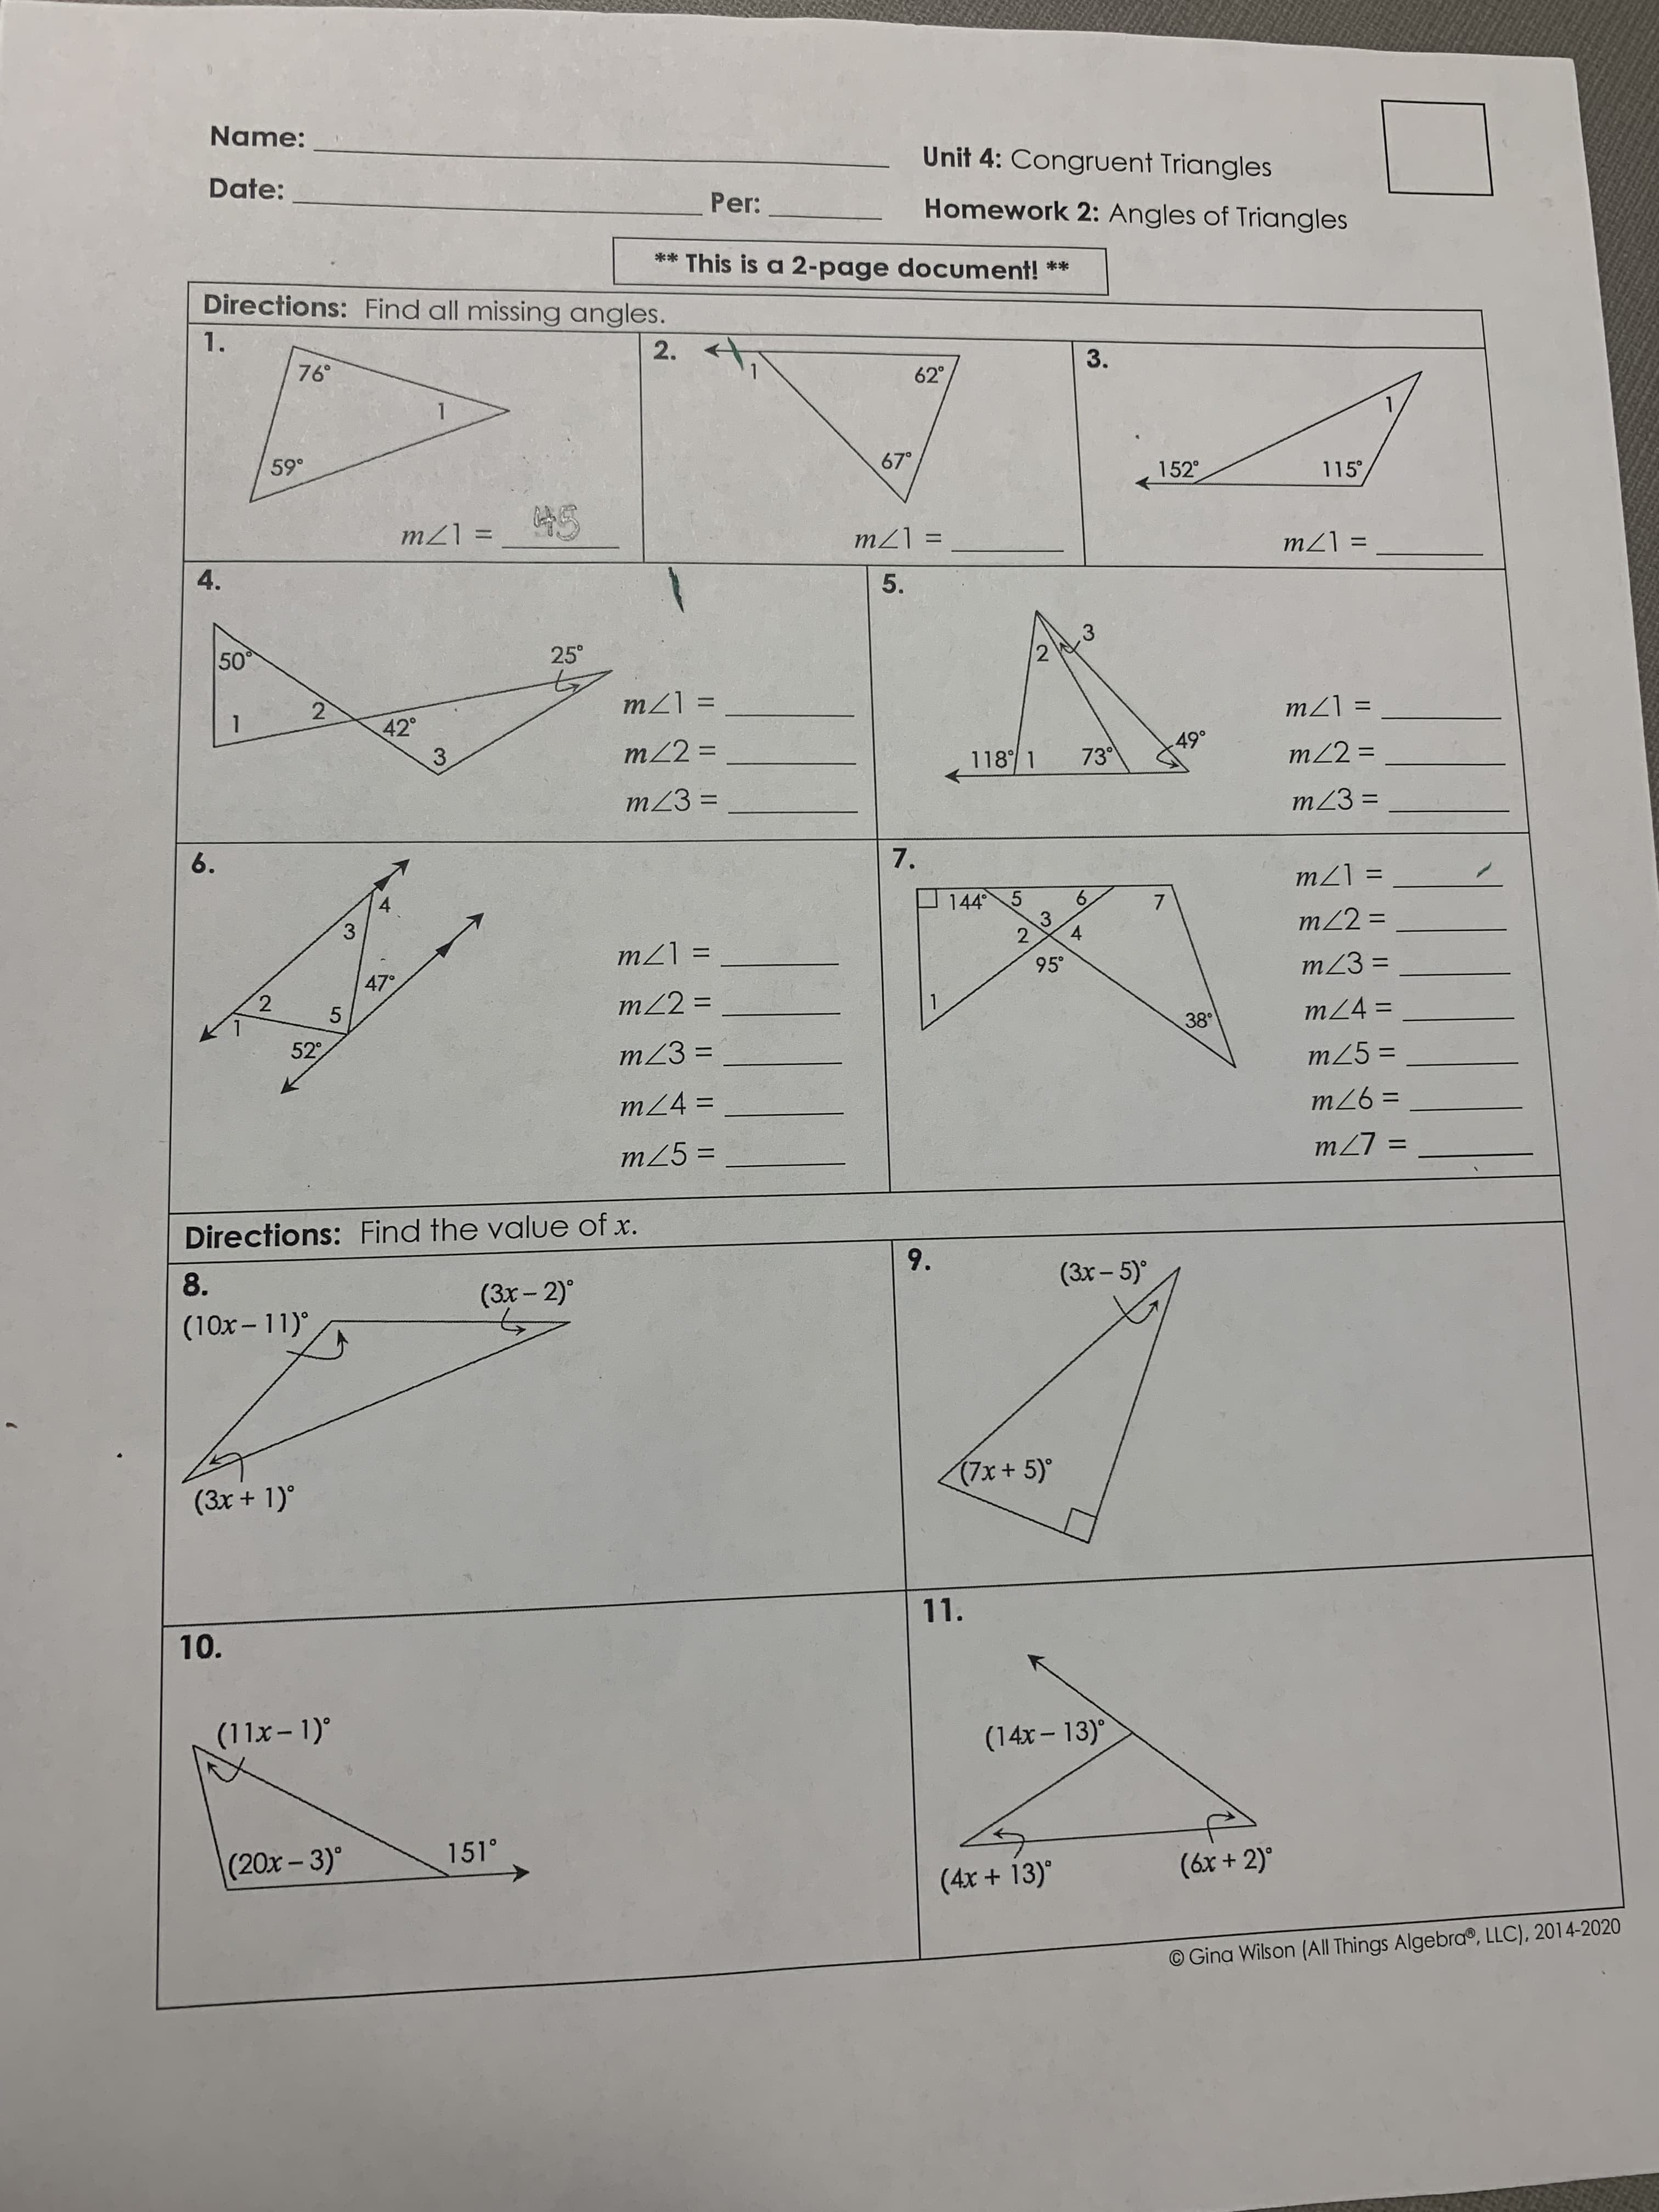 Name:
Unit 4: Congruent Triangles
Date:
Per:
Homework 2: Angles of Triangles
** This is a 2-page document! **
Directions: Find all missing angles.
1.
2.
3.
62°
1.
67°
152°
115
= [7W
5.
= [7W
%D
%3D
4.
= 17W
50
.3
2
25°
2)
42°
= 17W
= [7u
3
m22% =
118 1
73
m22 =
%3D
mZ3 =
mZ3 =
%3D
6.
7.
4.
3.
144 5
6.
3.
= [7W
m22 =
4.
95°
%D
2
%3D
= [7l
m23 =
47°
m22 =
1
5
%3D
m24 =
38
%3D
52
m23 =
m25 =
%3D
%3D
m24 =
%3D
= 97
m25 =
%3D
= L7W
Directions: Find the value of x.
9.
8.
(3x- 5)°
(3x- 2)°
(10x - 11)°
(3x + 1)°
(7x +5)°
11.
10.
(11x- 1)°
(14x-13)
(20x-3)°
151°
(4x + 13)°
(6x + 2)°
O Gina Wilson (All Things Algebra®, LLC), 2014-2020
